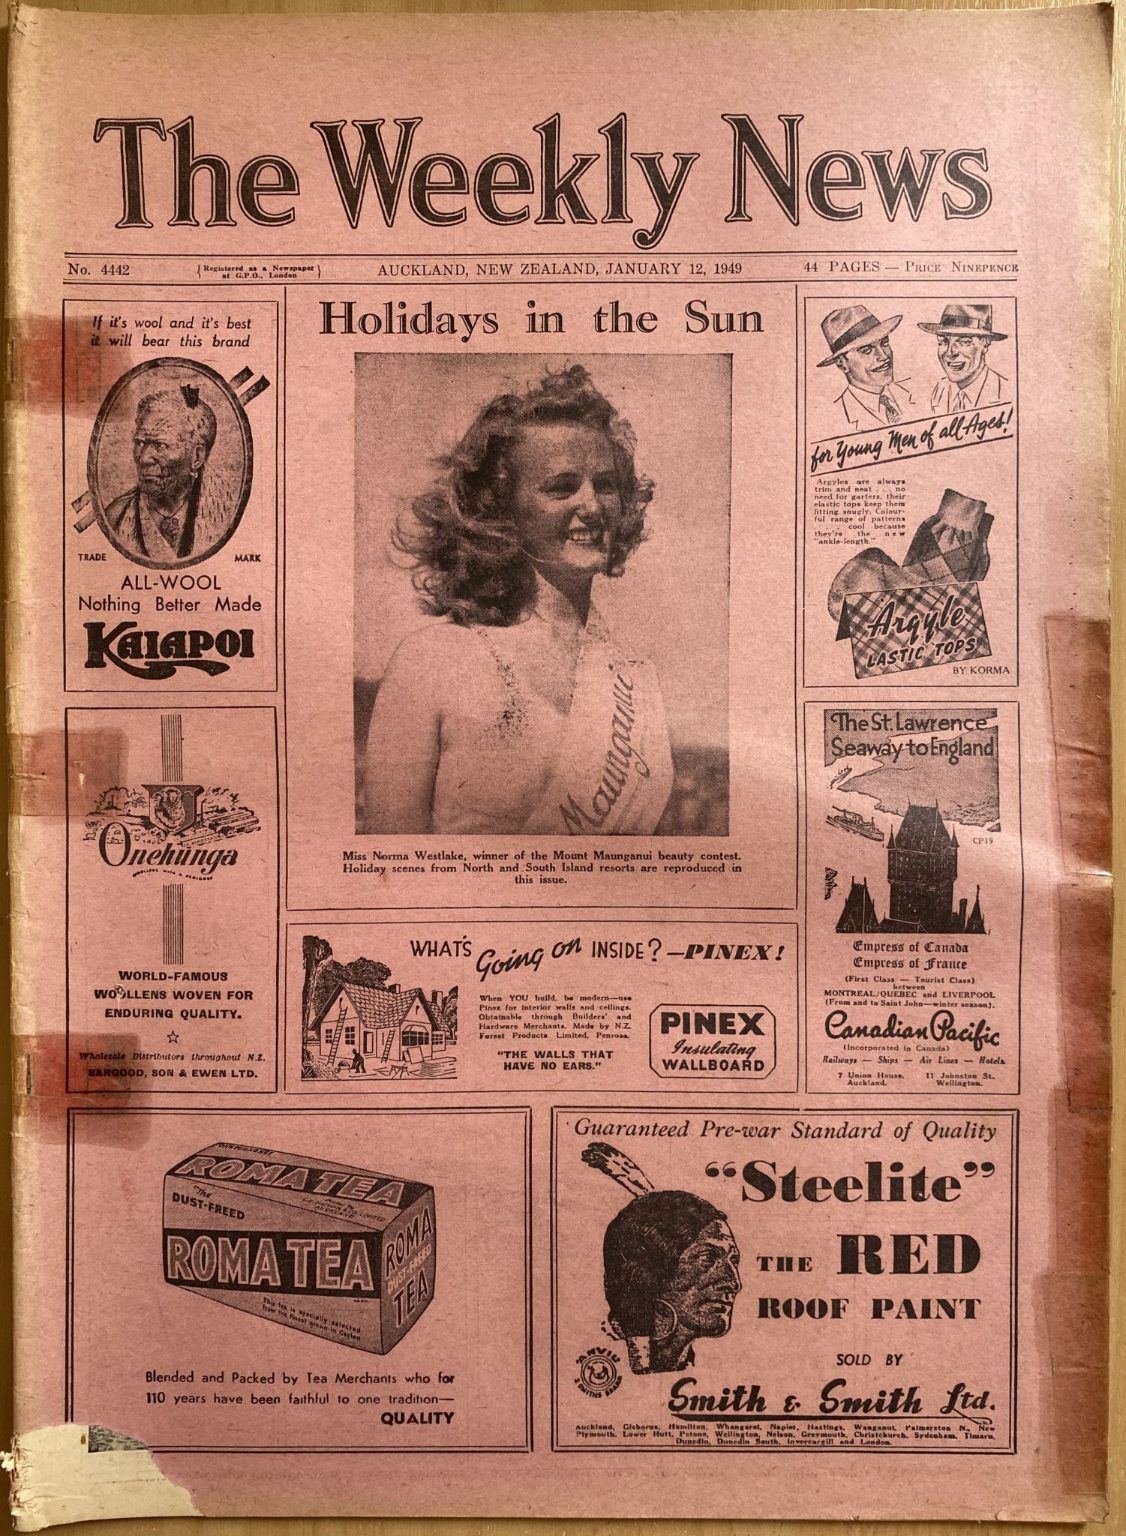 OLD NEWSPAPER: The Weekly News, No. 4442, 12 January 1949